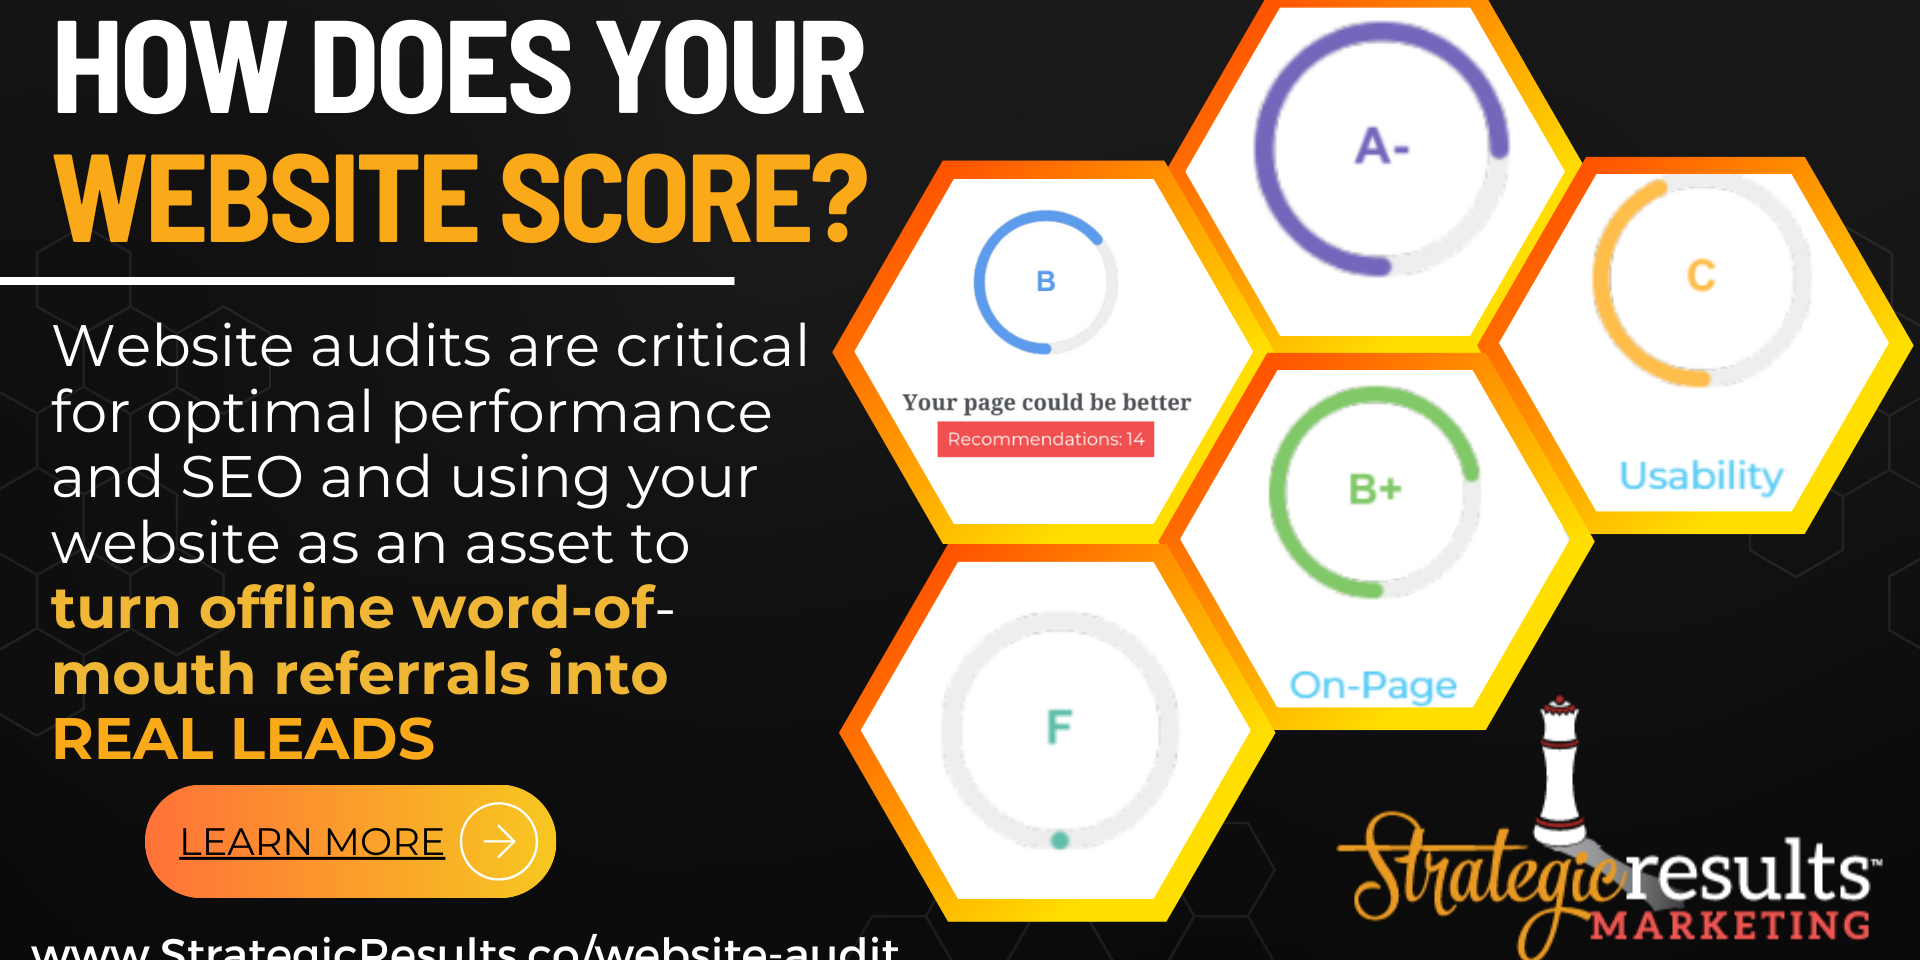 How does your website score? Site audits are citical and include on-page seo, performance, usability, backlinks and social media. this image includes hexagons of scores from A to F and a link to access a free website audit